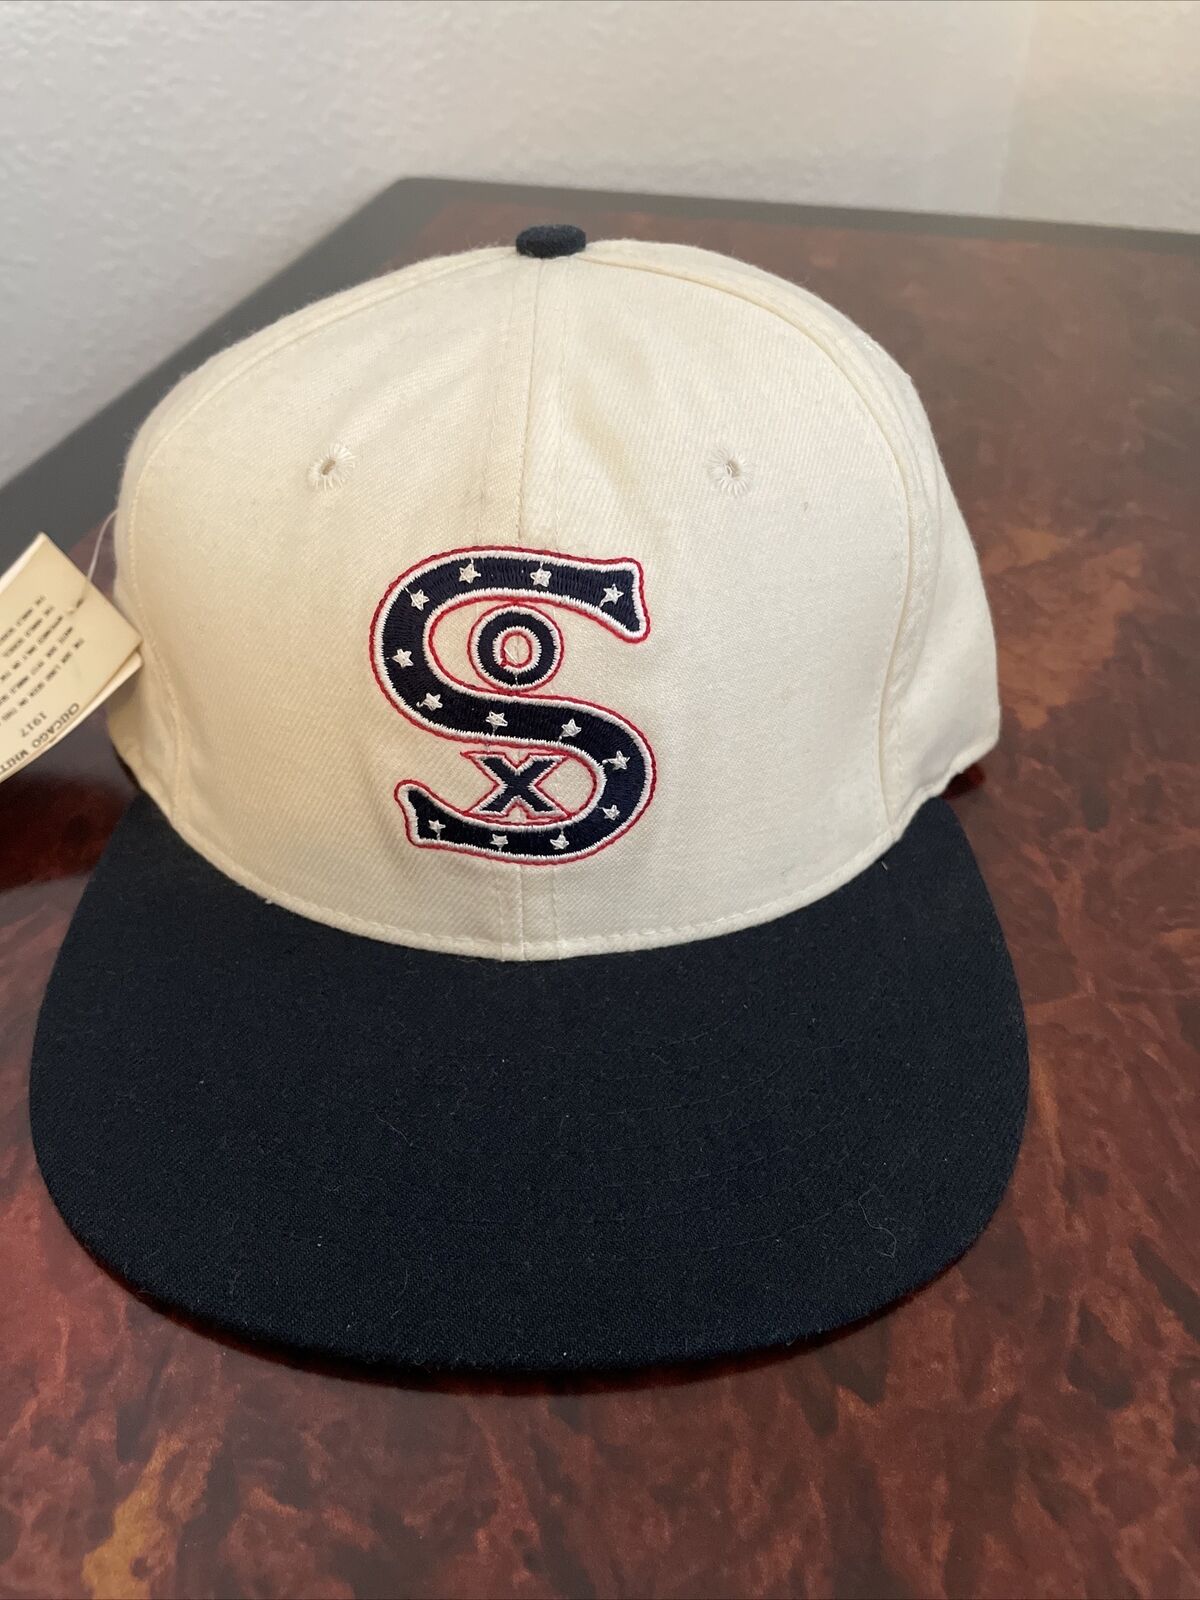 Vintage Chicago White Sox 1917 Fitted Baseball Cap Hat Cooperstown Collection